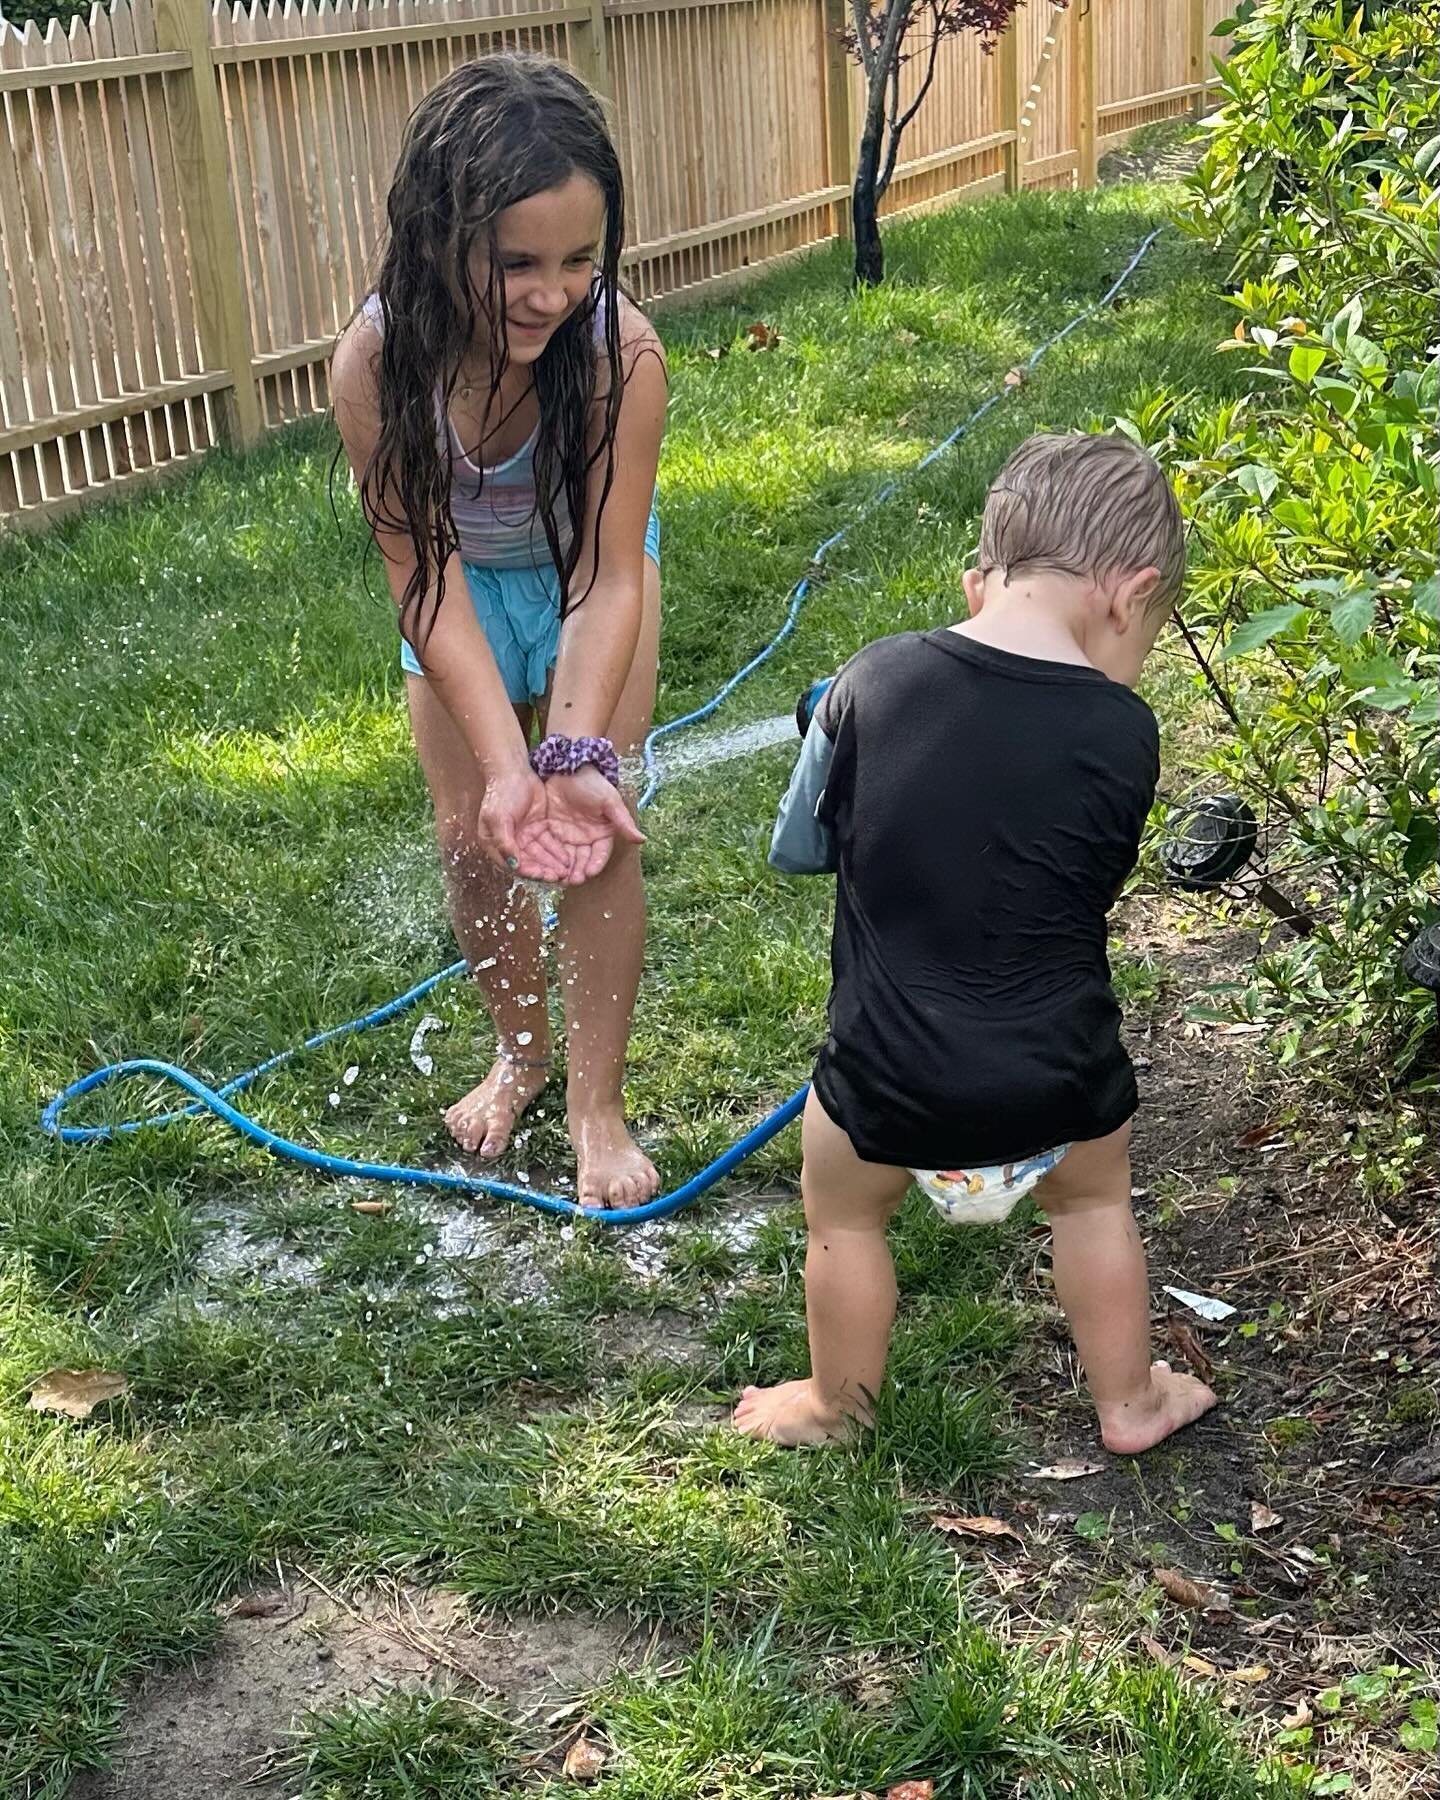 What happens when a 2 year old gets his hands in a hose! #summer #sisterandbrother